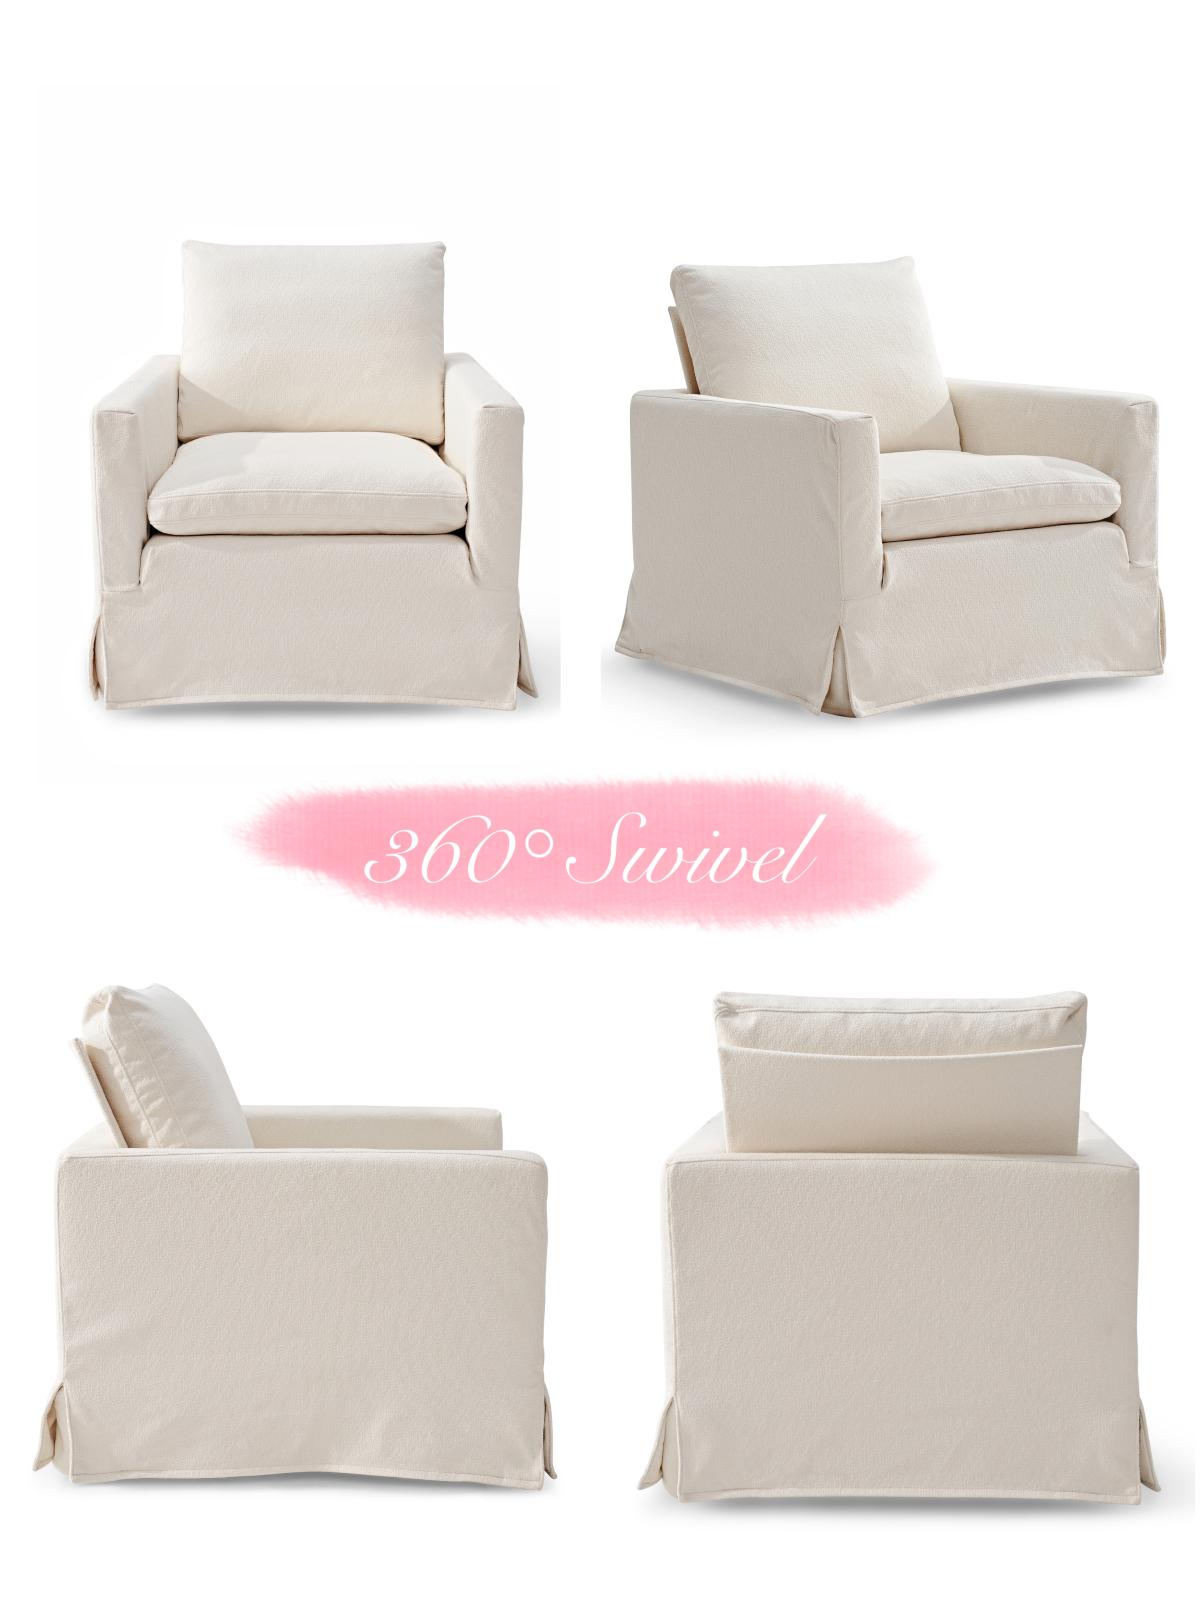 Swivel Chair with Loose Cover, Beige Fabric, Solid wood, Dimensions: 32.67